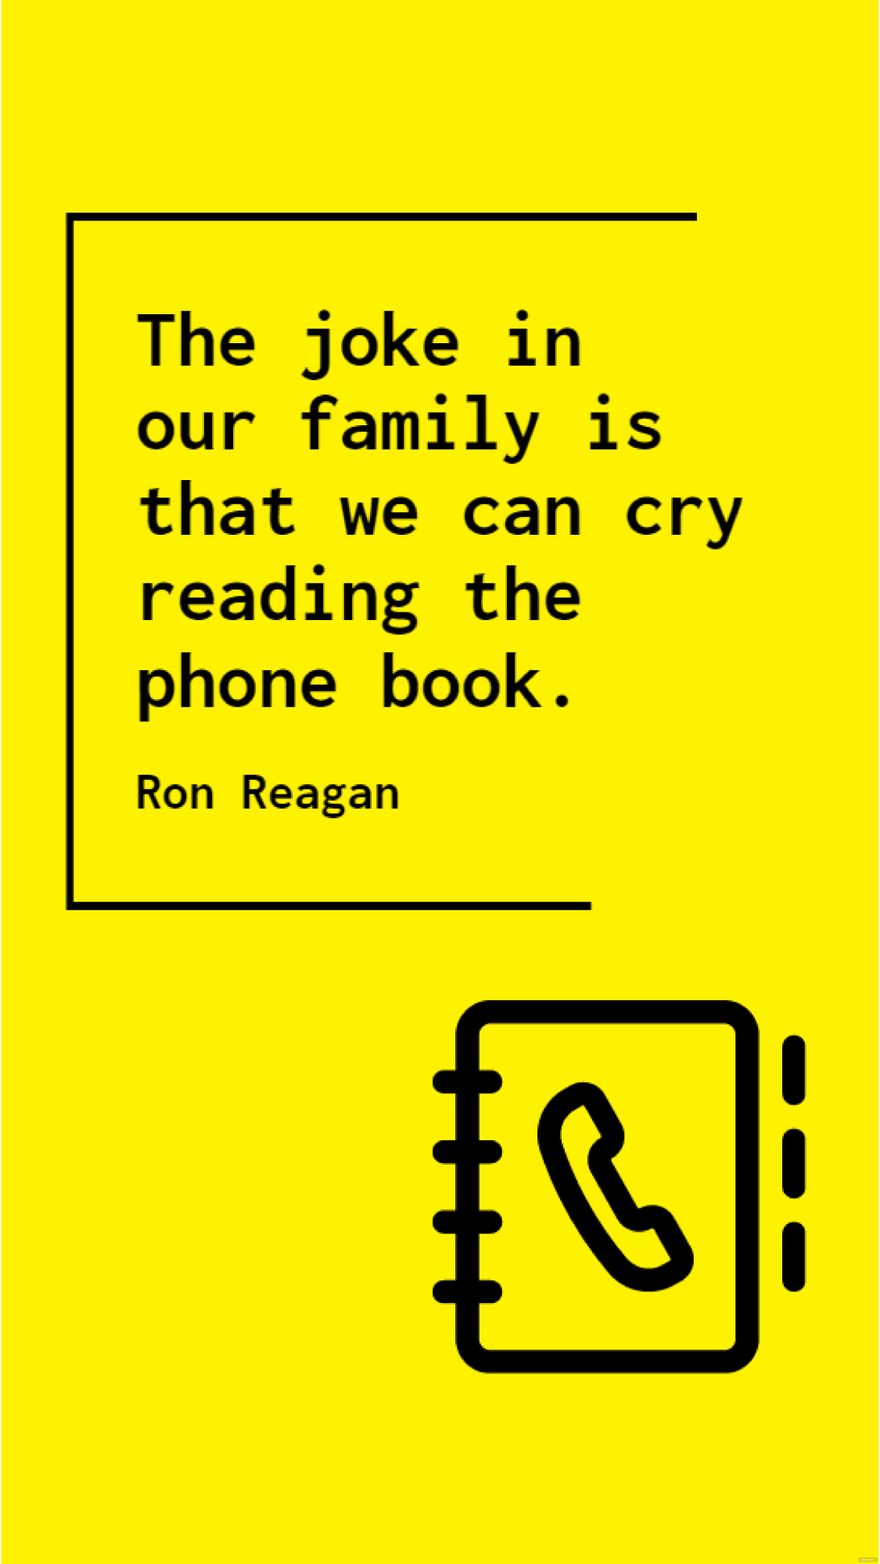 Free Ron Reagan - The joke in our family is that we can cry reading the phone book. in JPG